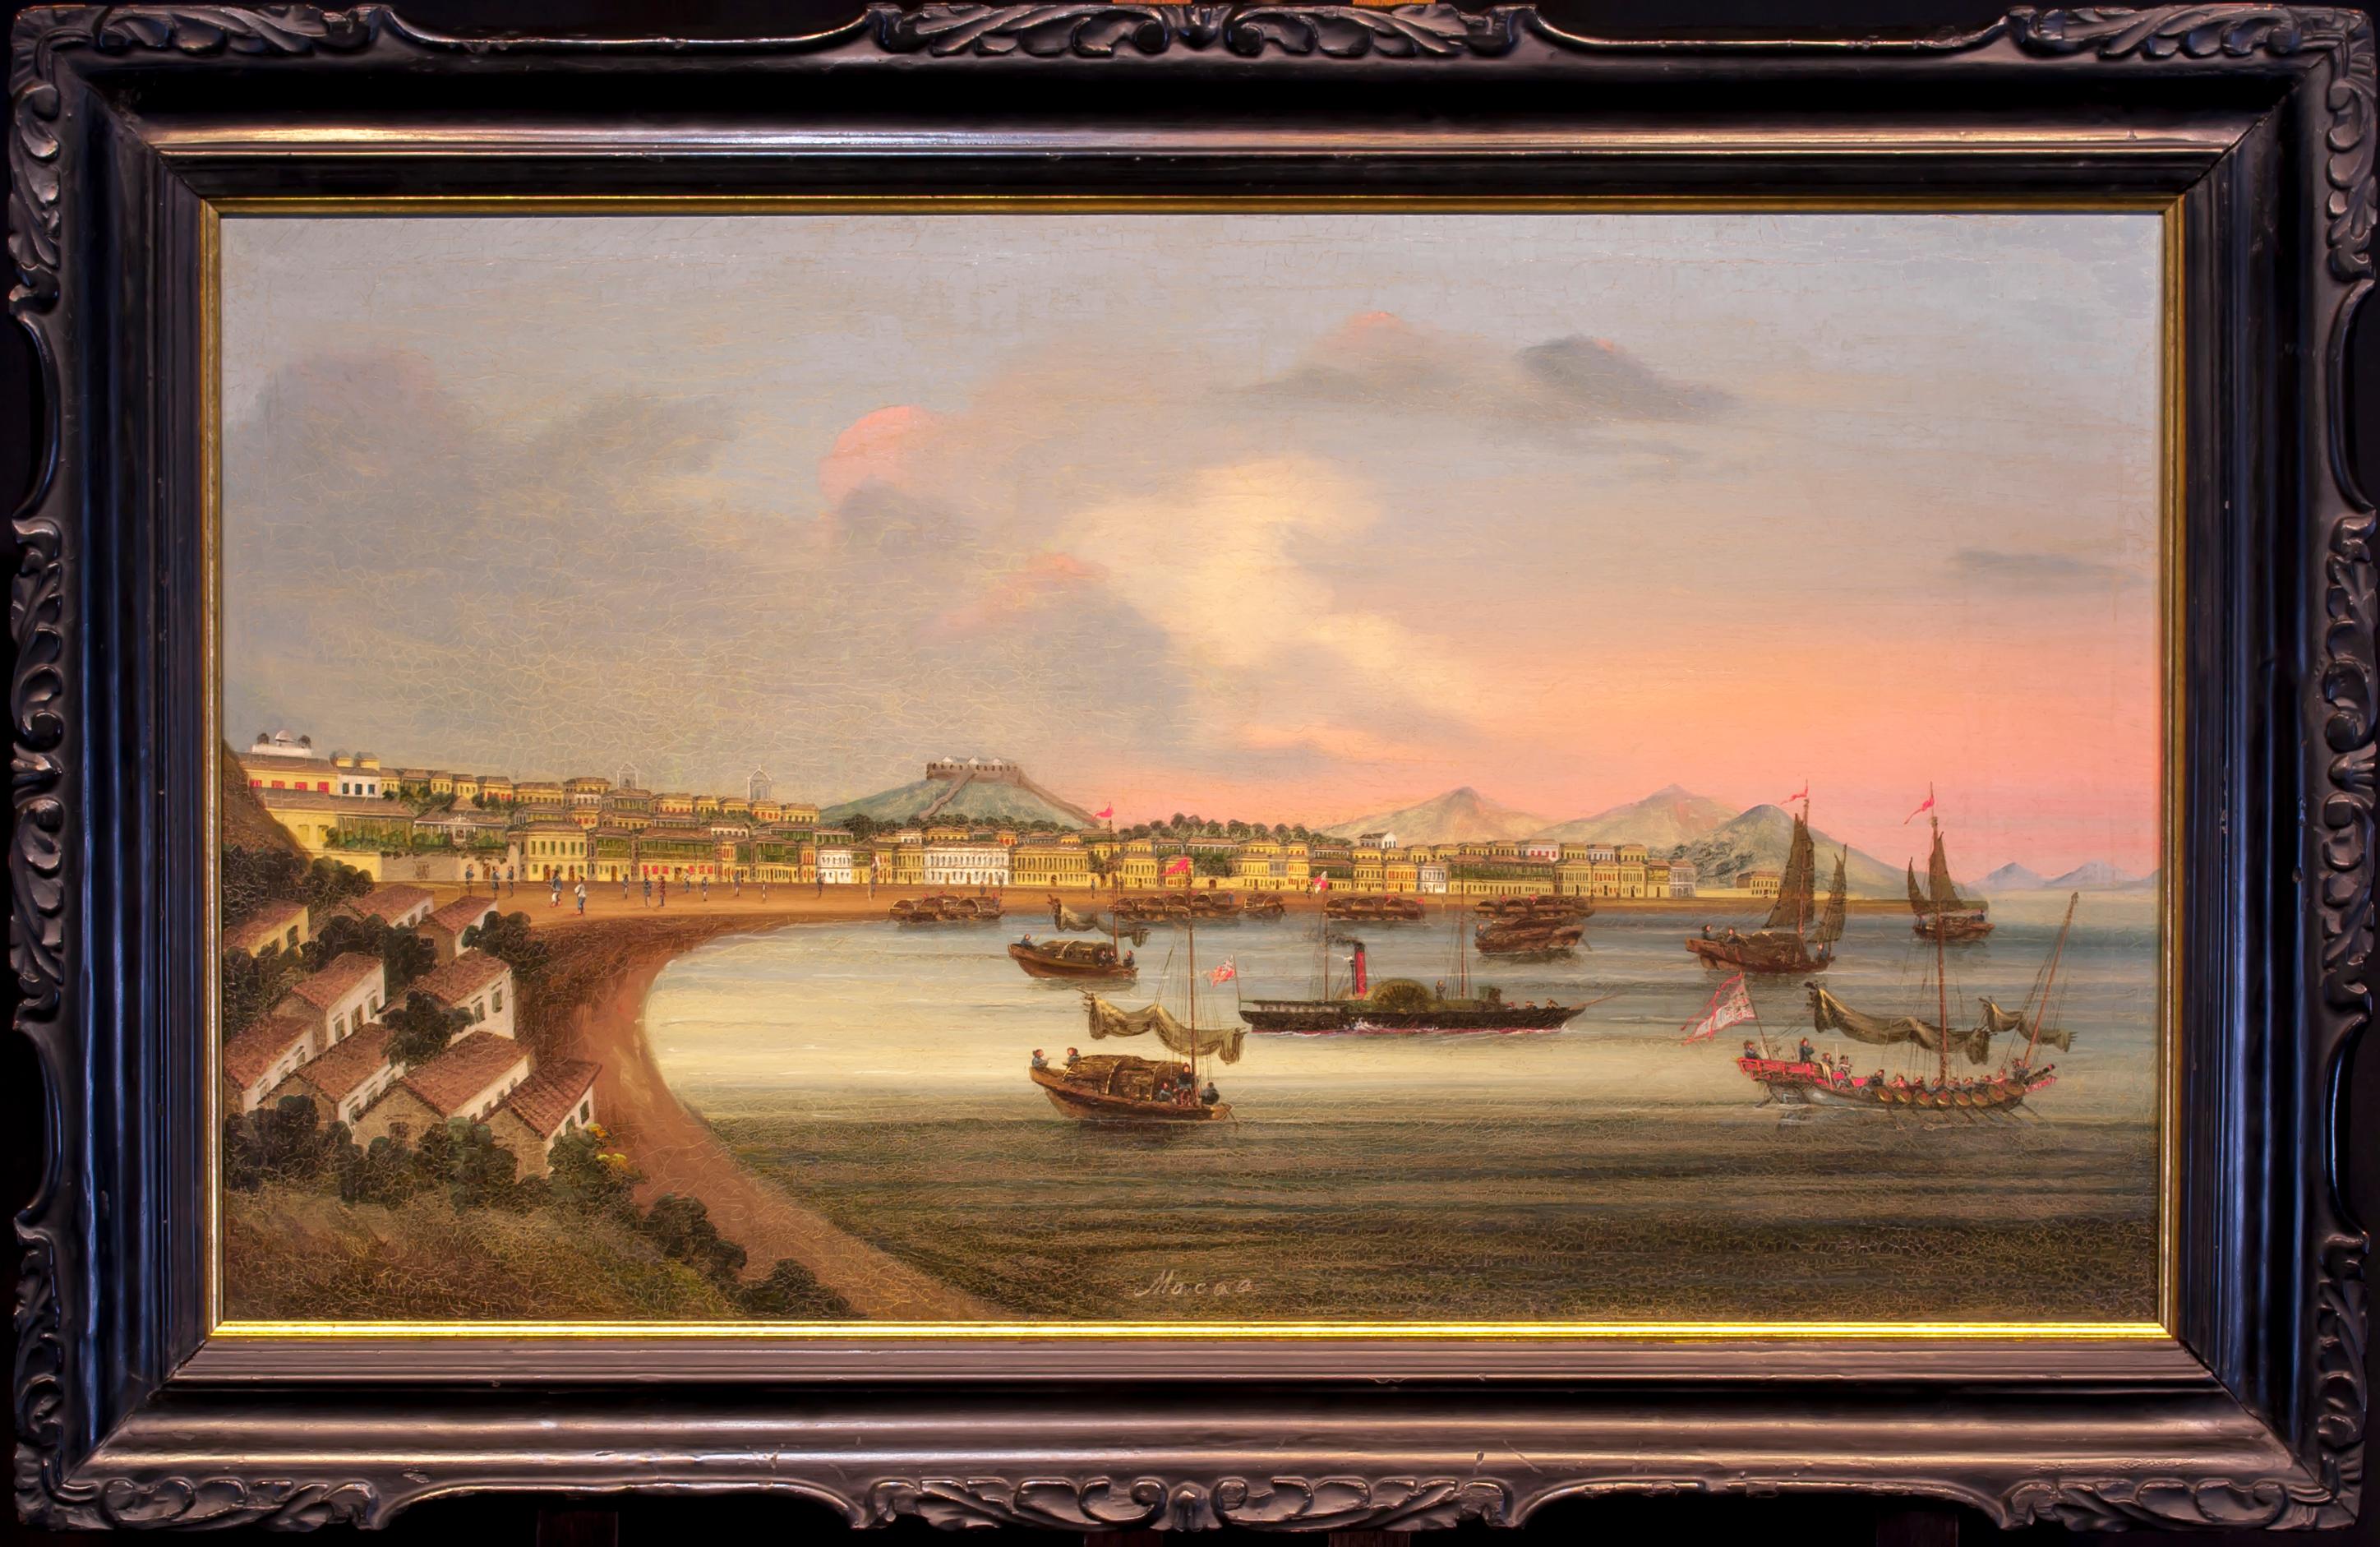 Macao - Autres styles artistiques Painting par 19th Century Chinese school